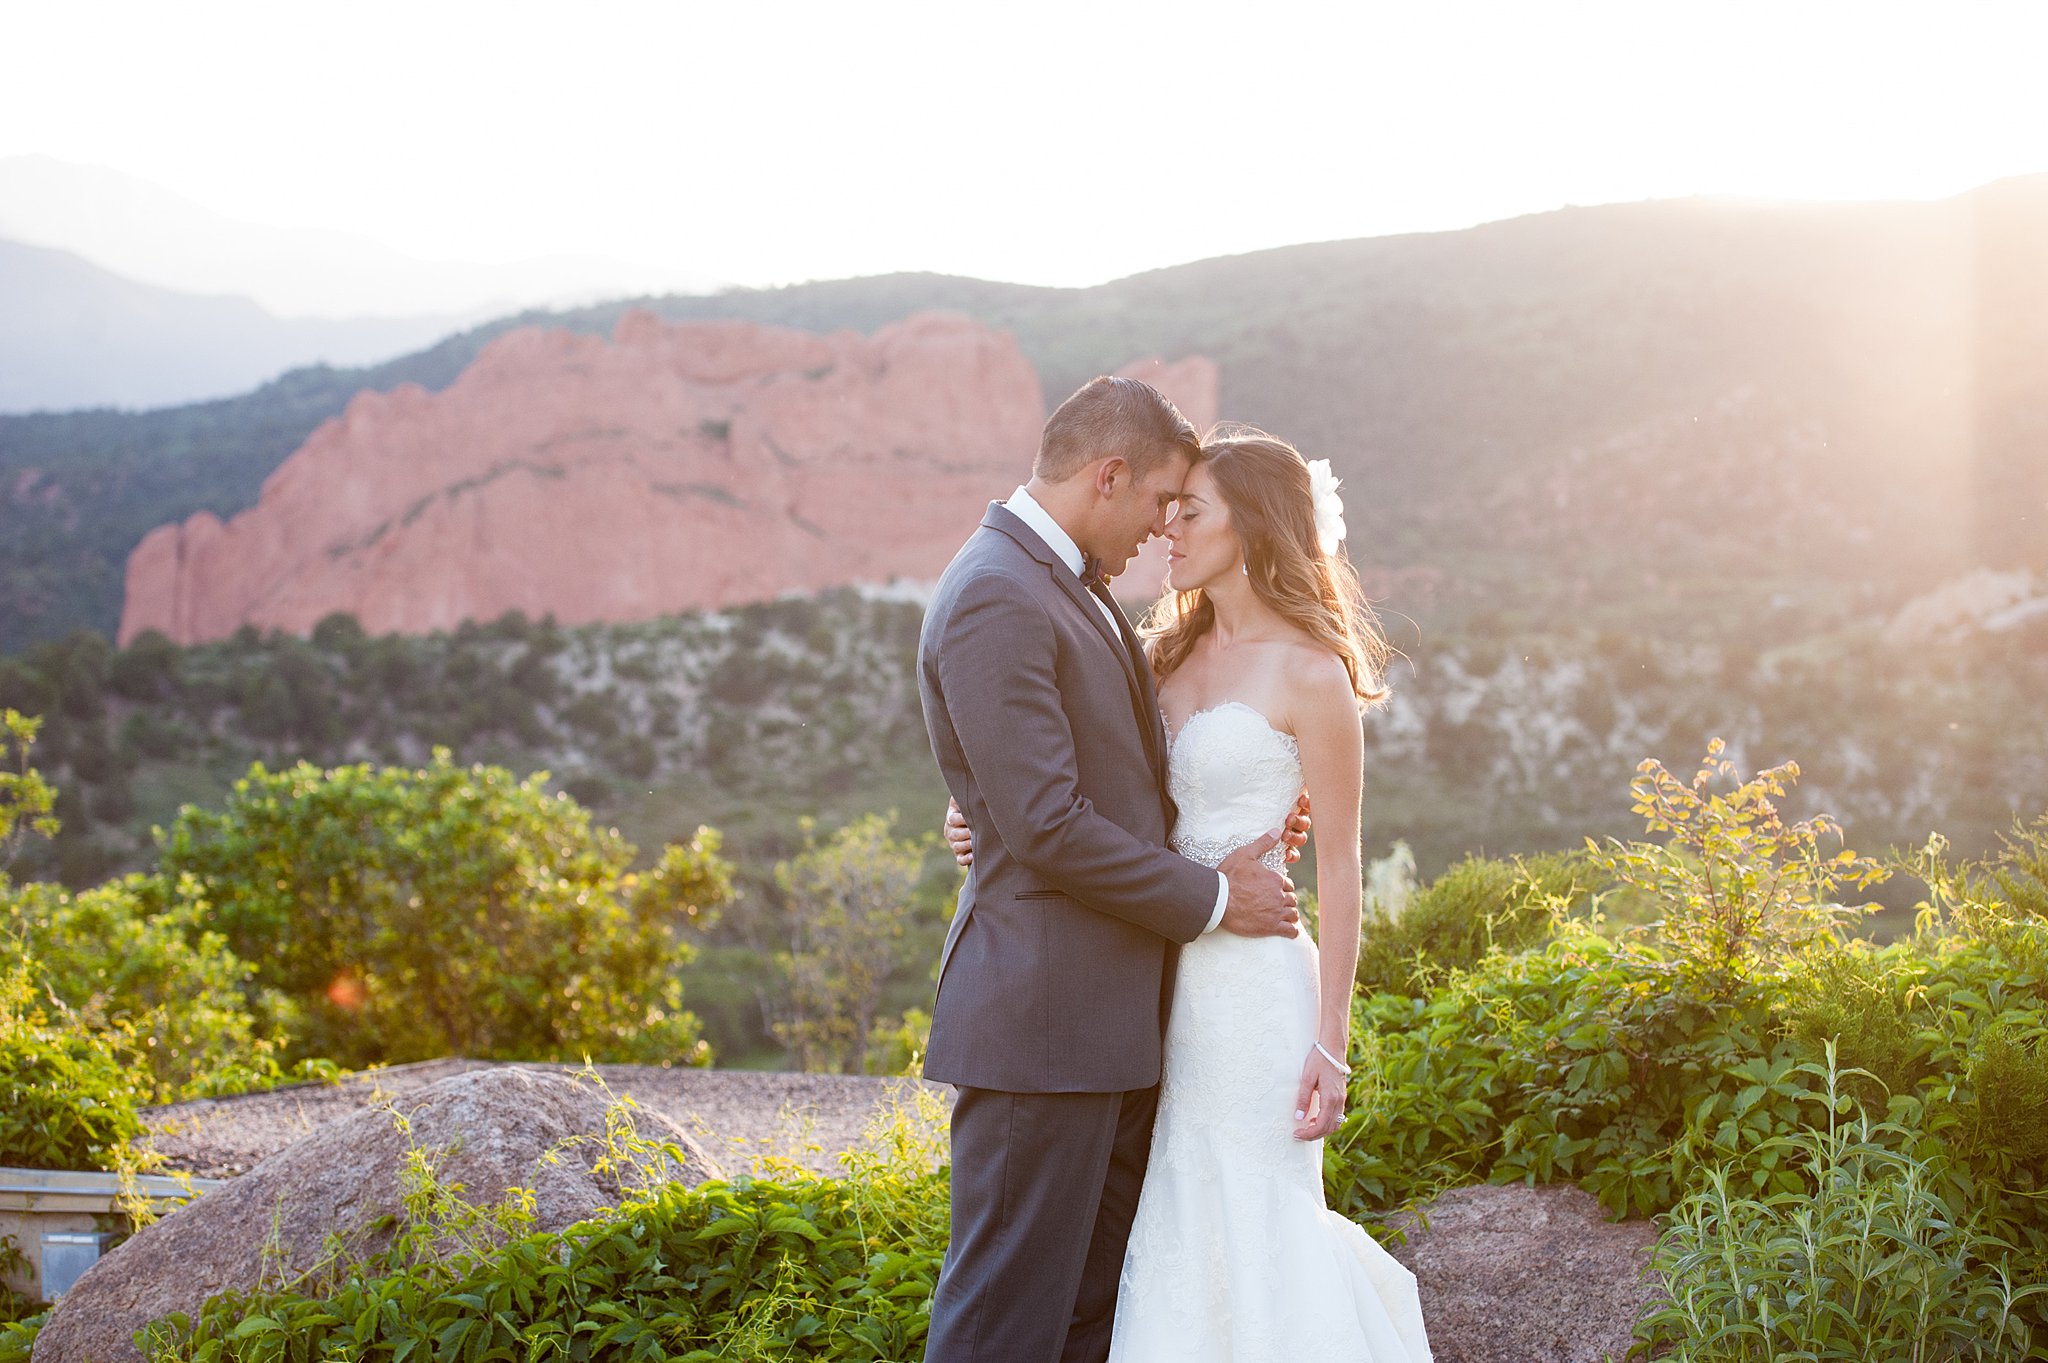 NEwlyweds share an intimate moment on a mountain trail at their Garden of The Gods Weddings at sunset